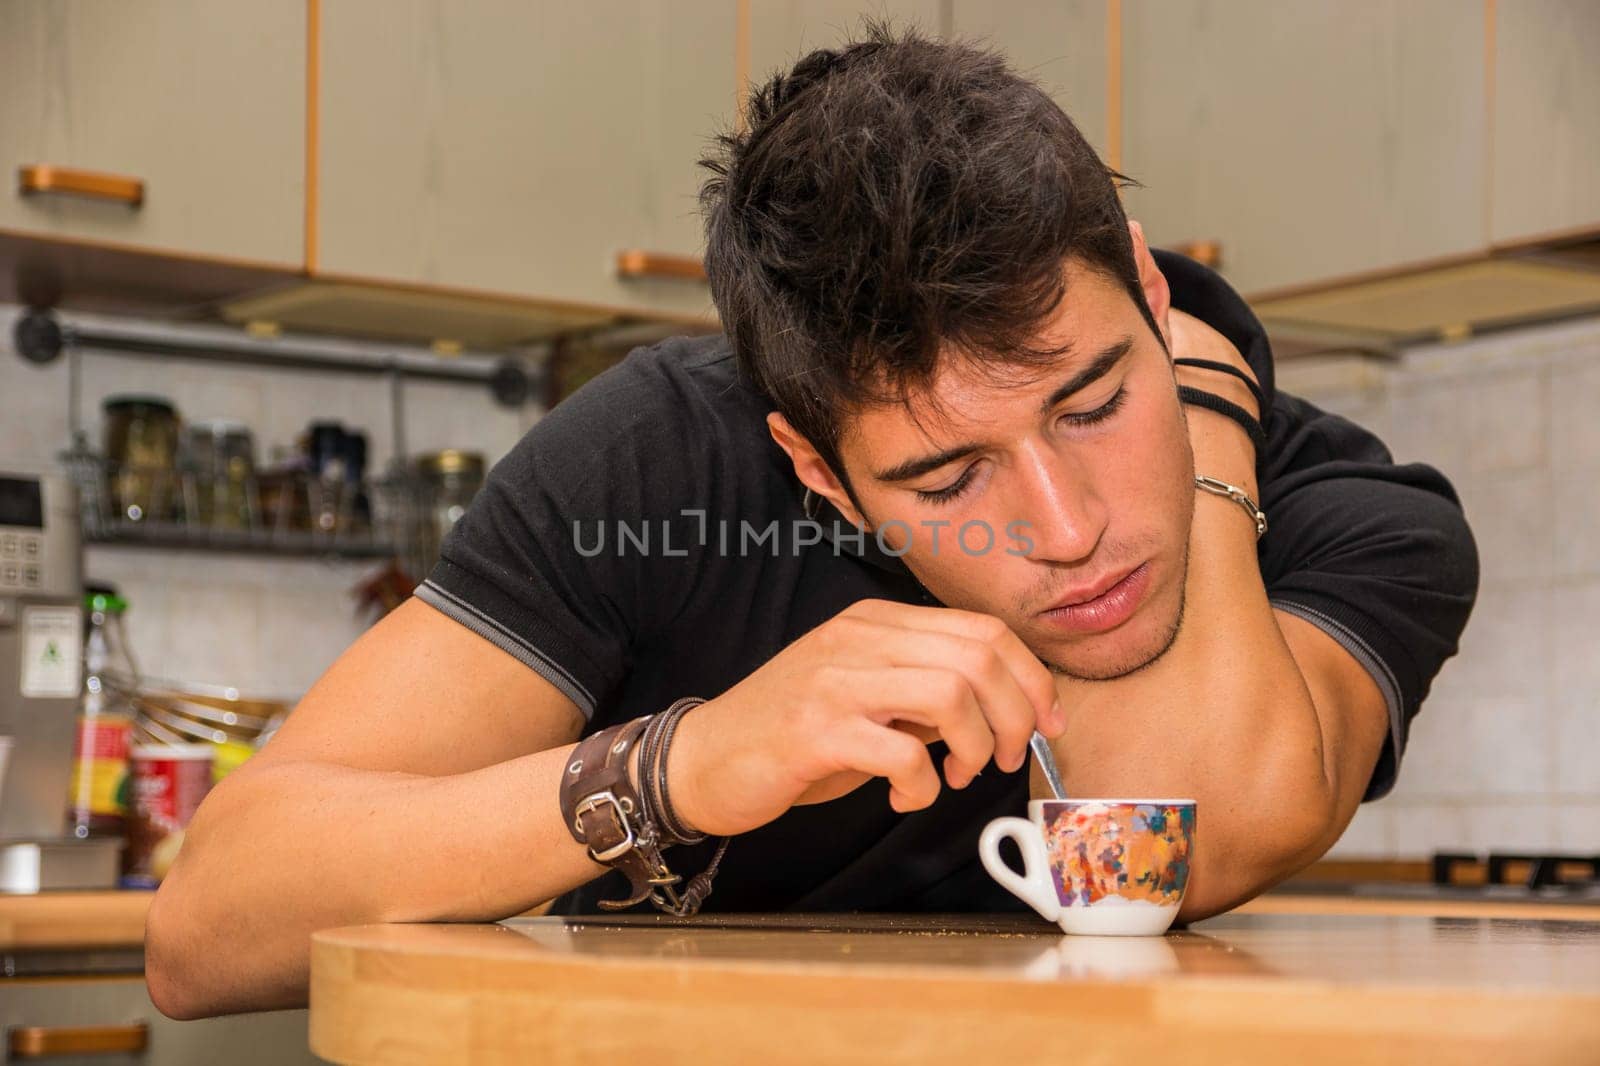 Focused Man Enjoying a Cup of Coffee at a Table by artofphoto